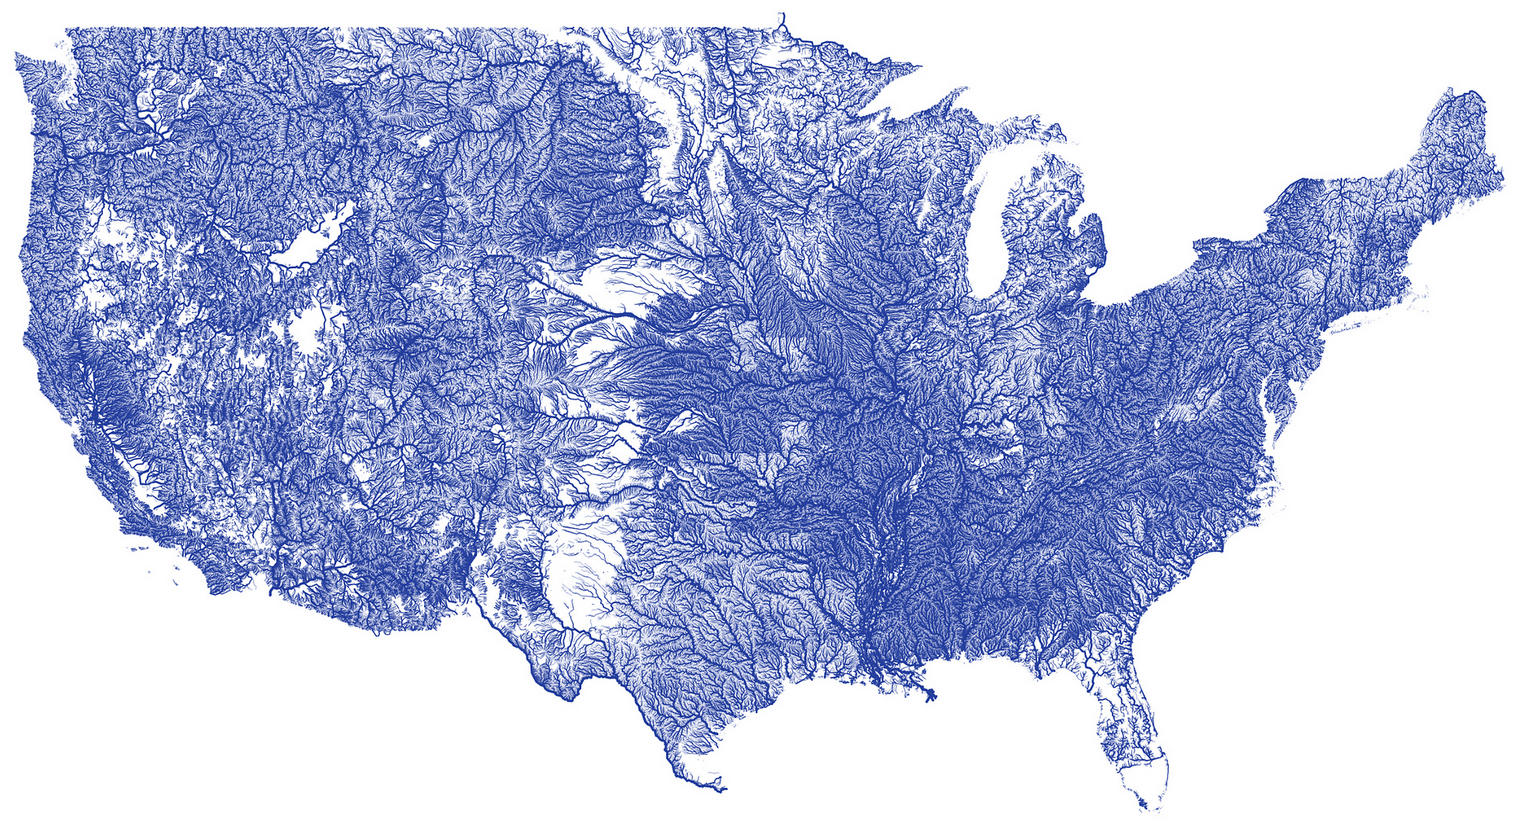 All the rivers in the US